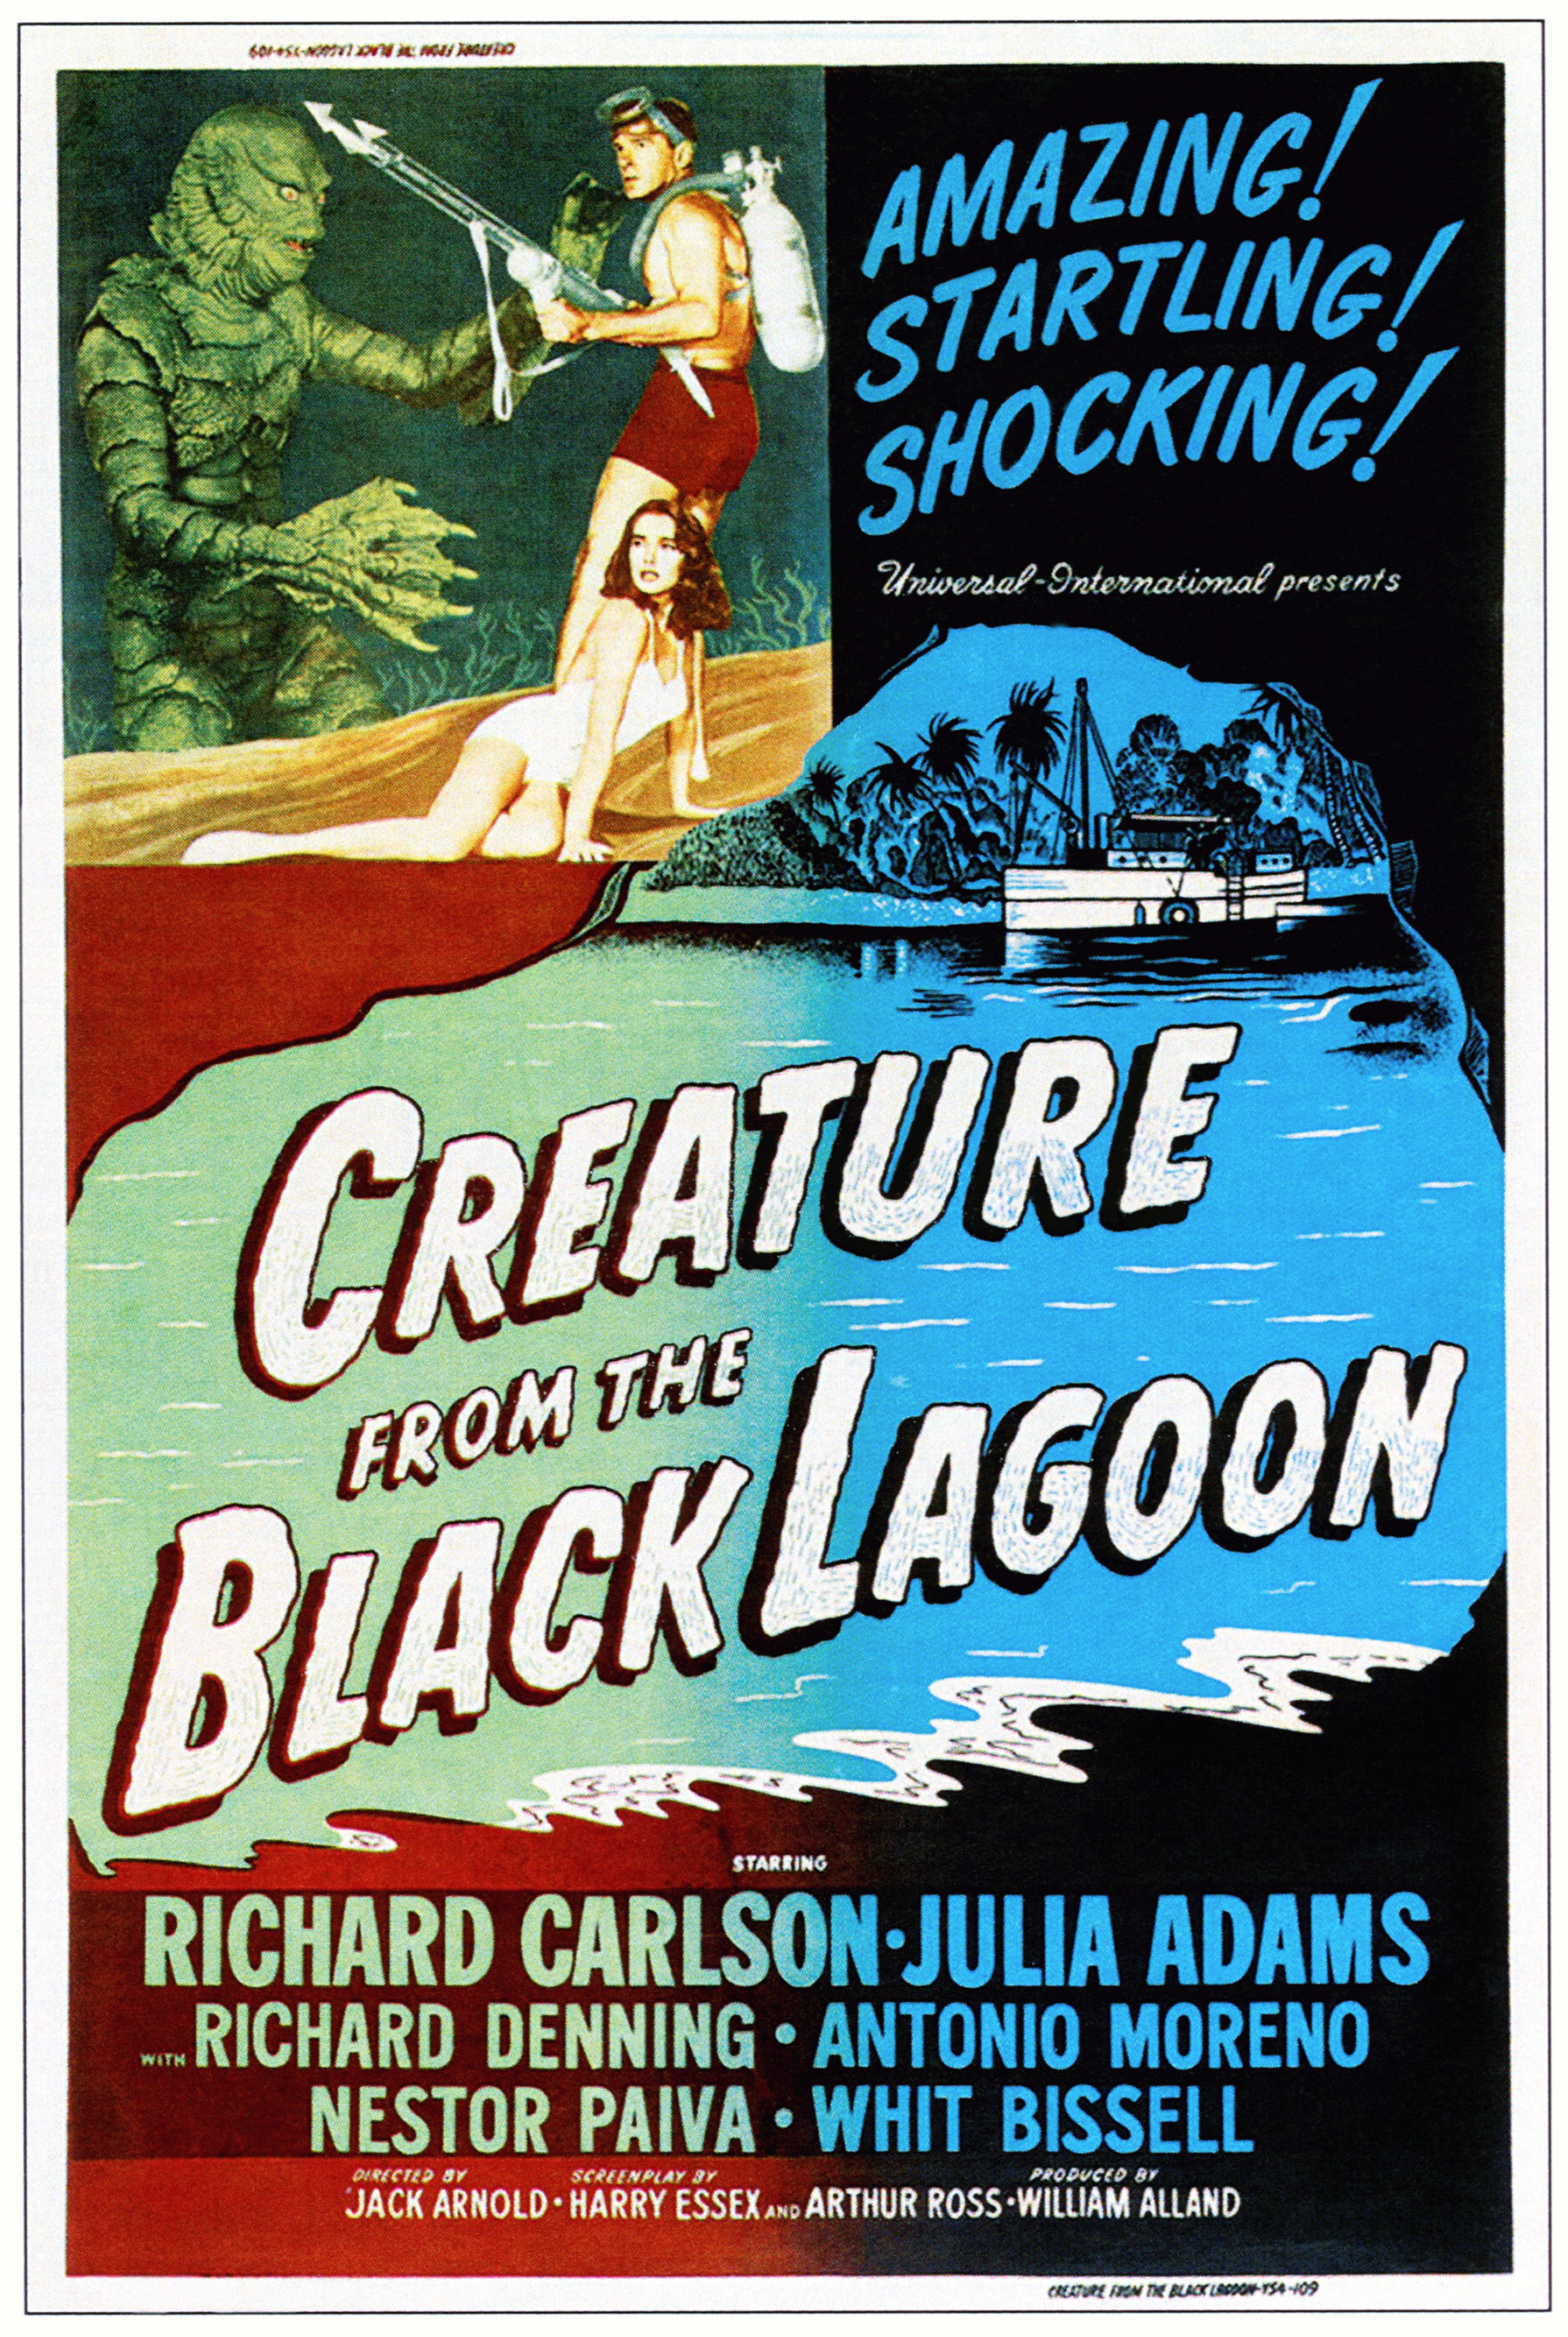 Original &quot;Creature From The Black Lagoon&quot; poster featuring all the stars names and multiple graphics